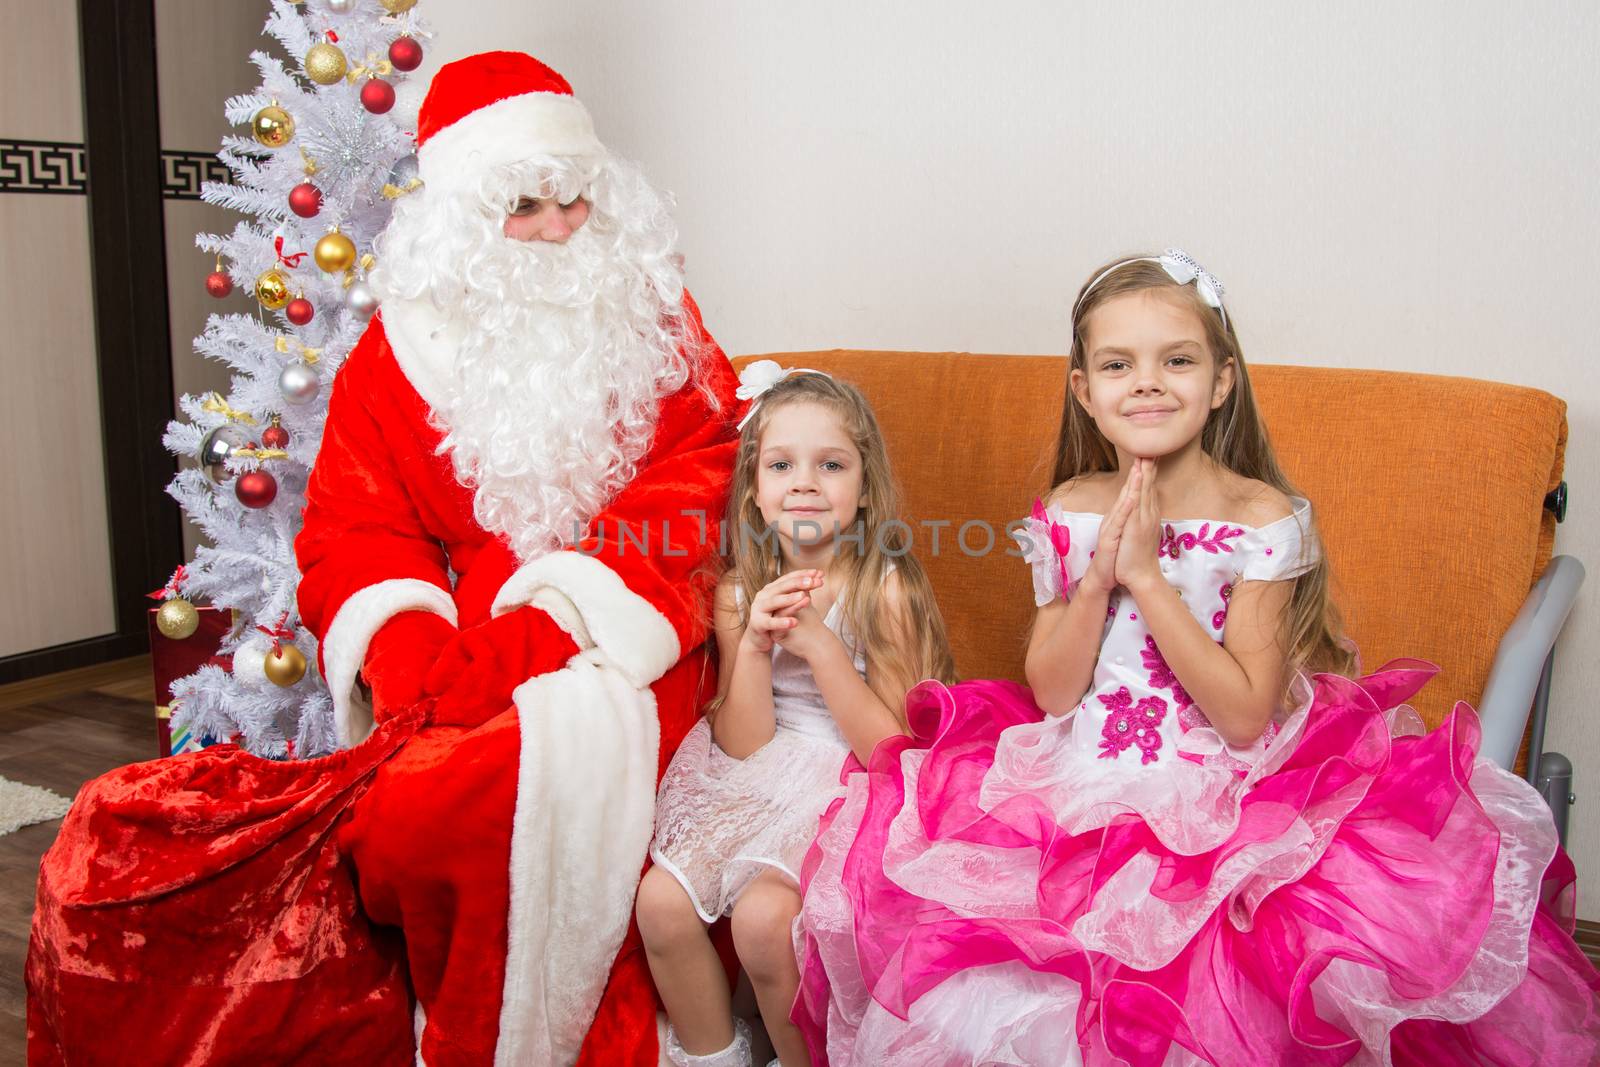 The girls are asking for frost grandfather to give them gifts